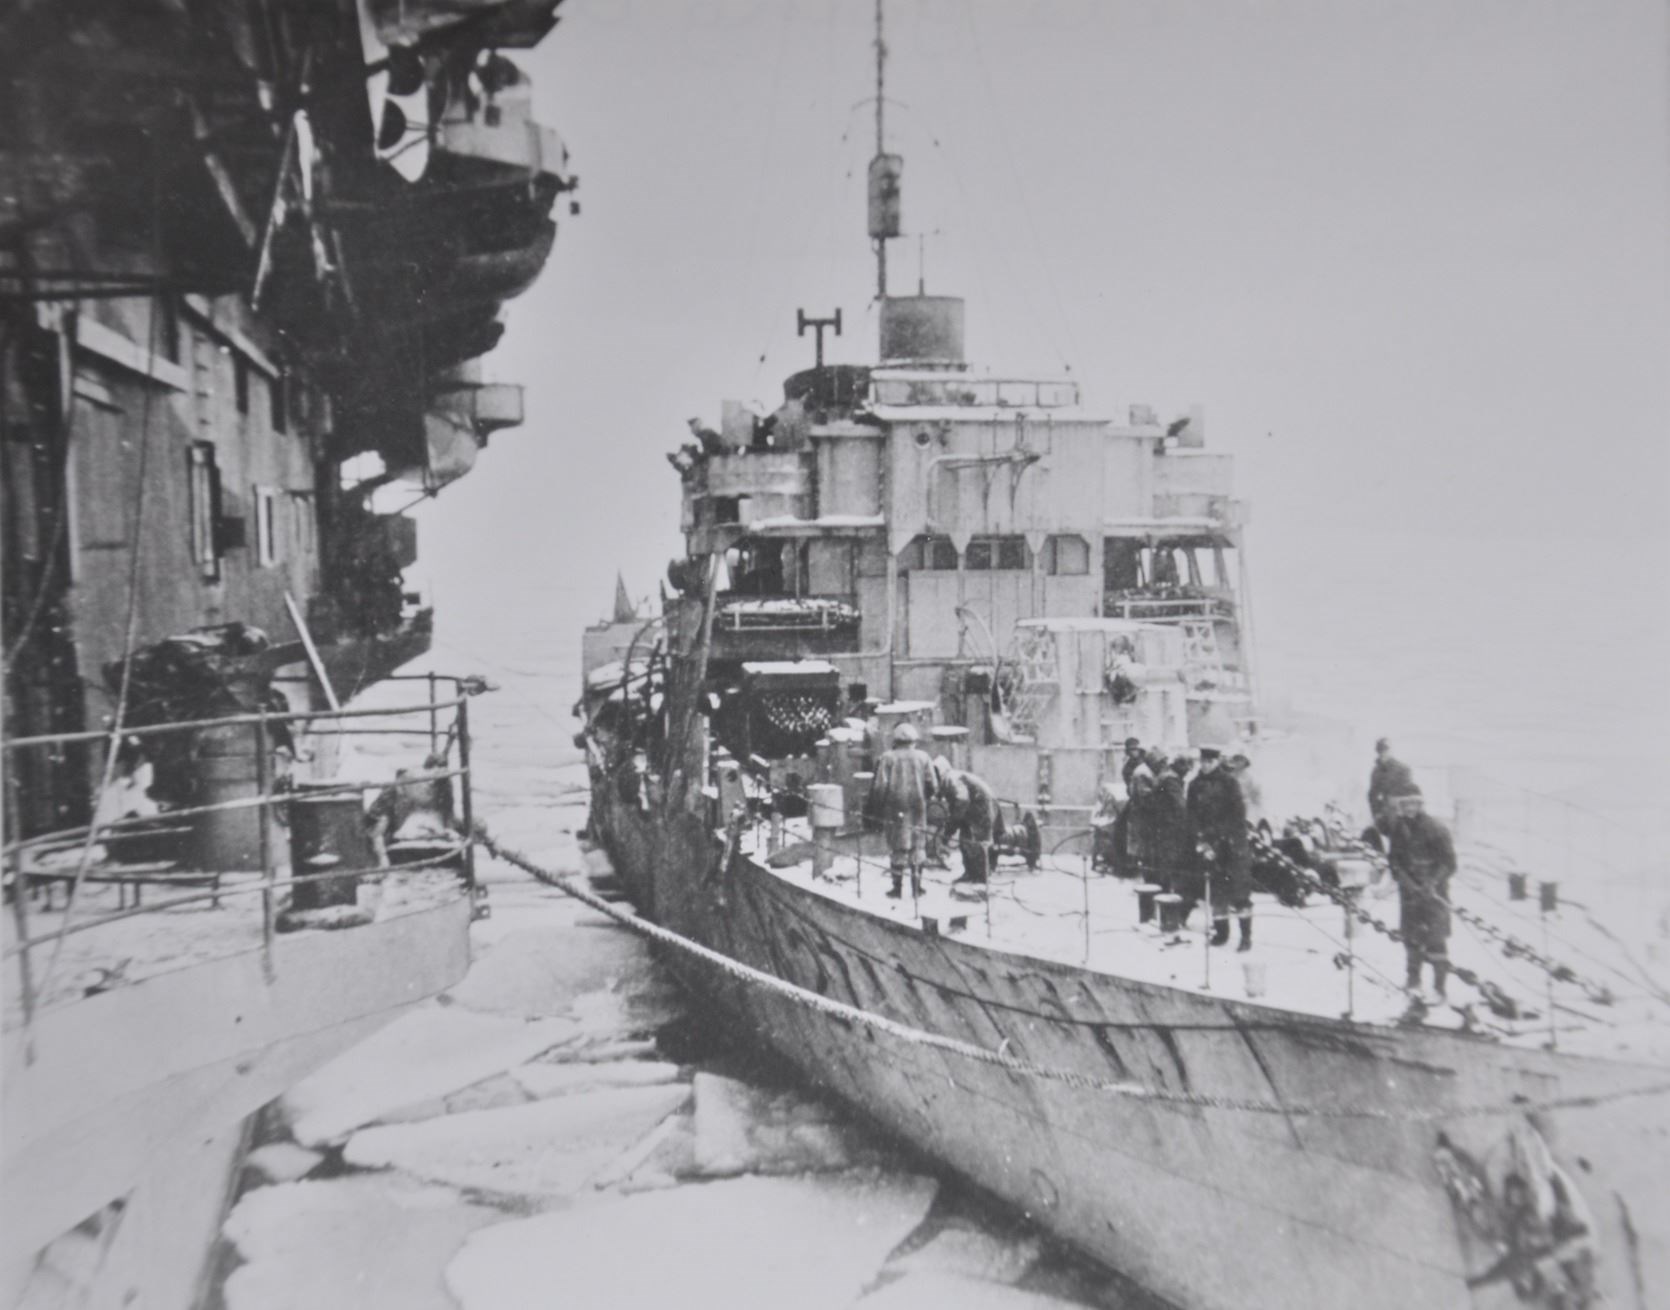 An Arctic convoy ship in the ice during the war.